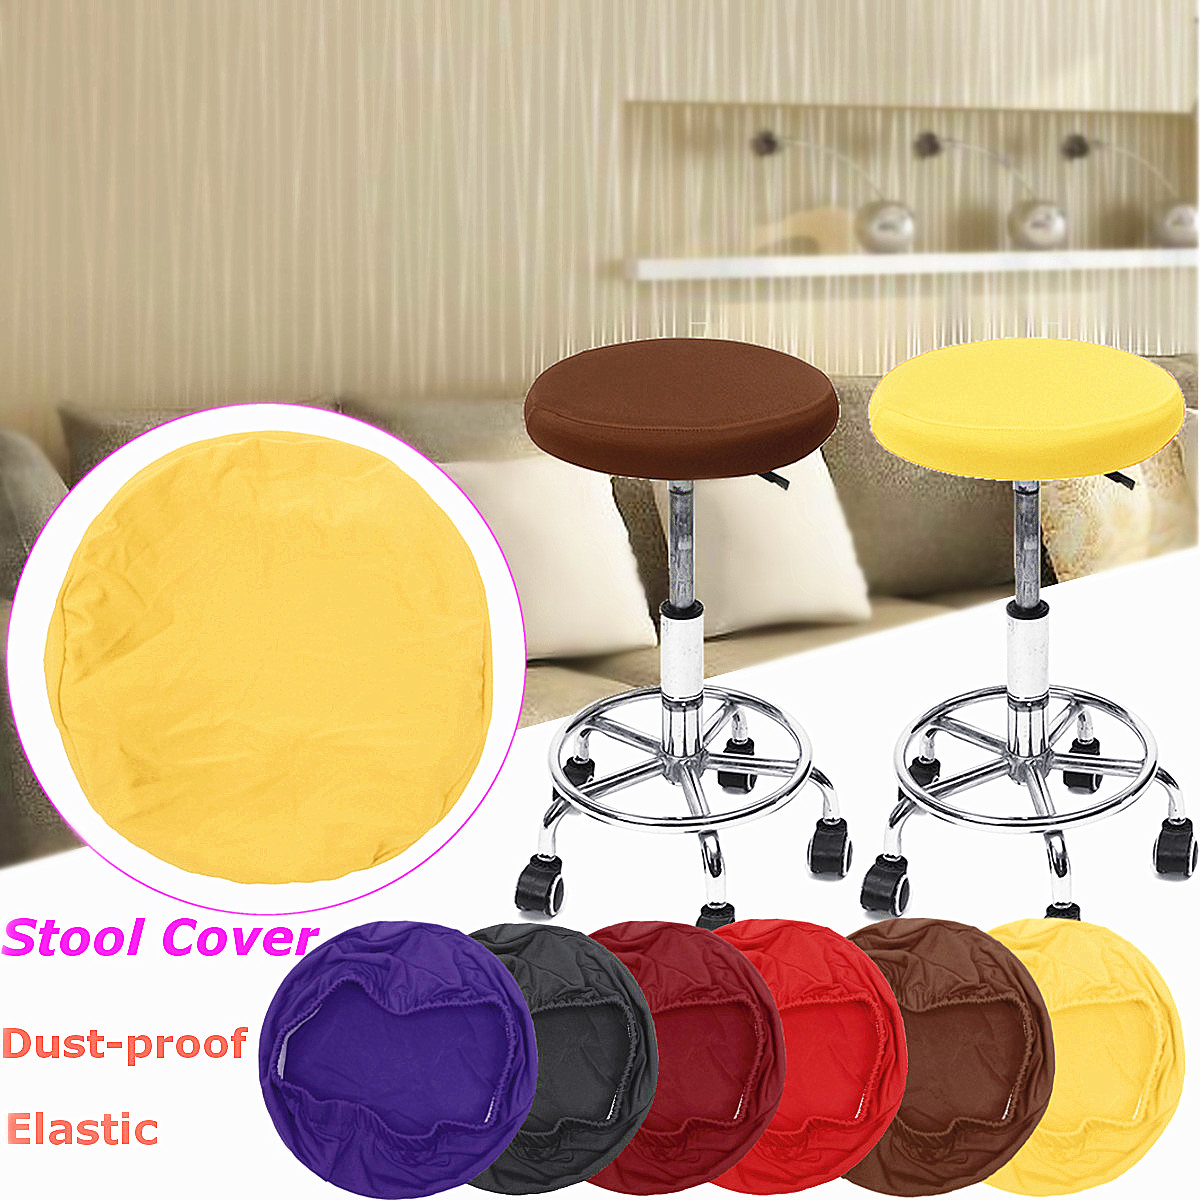 Round-Stool-Covers-Elastic-Fiber-6-Colors-Round-Household-Chair-Sleeve-Protector-1438986